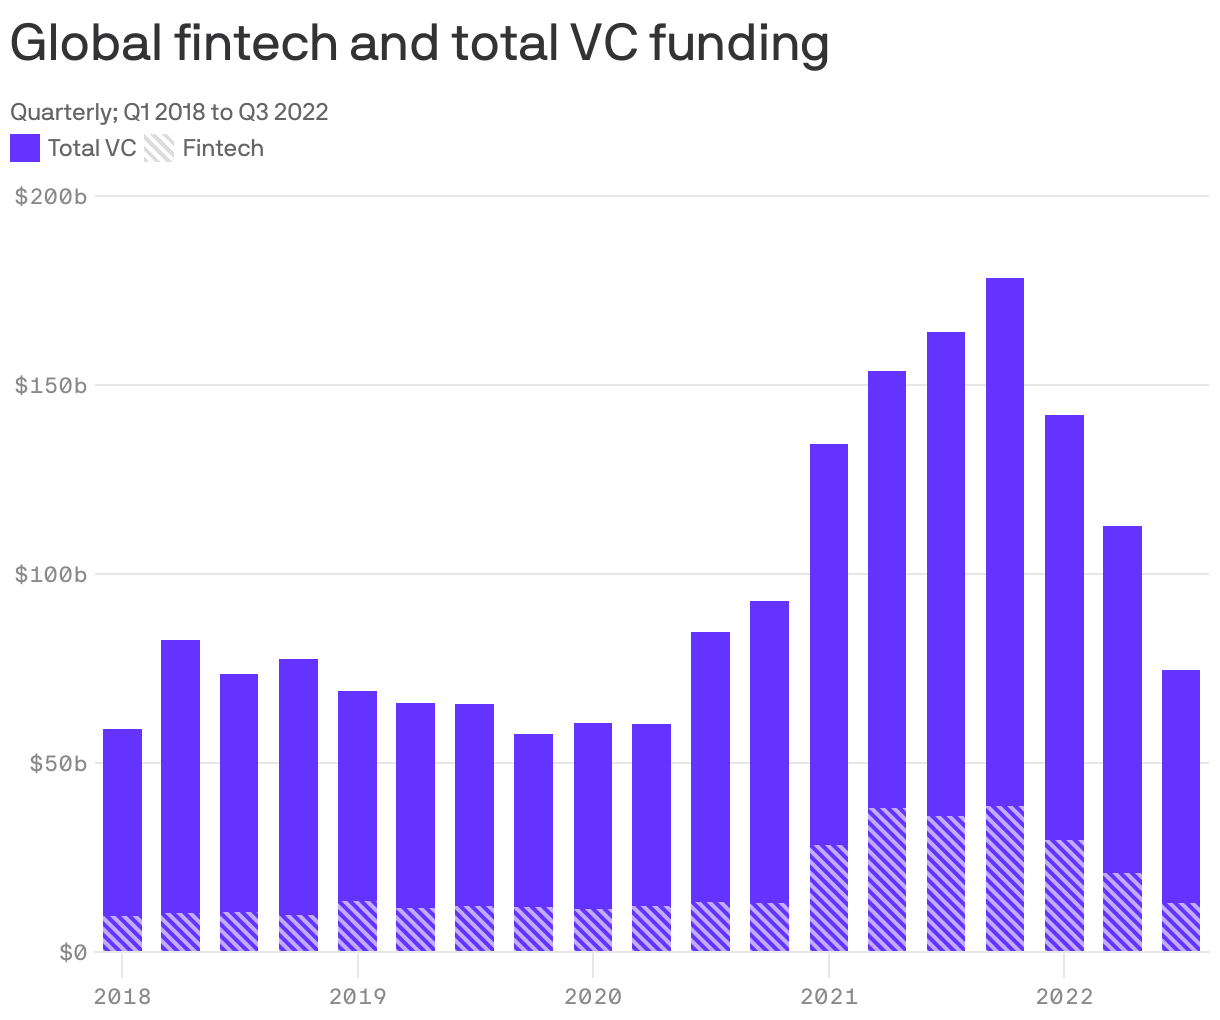 Global fintech and total VC funding